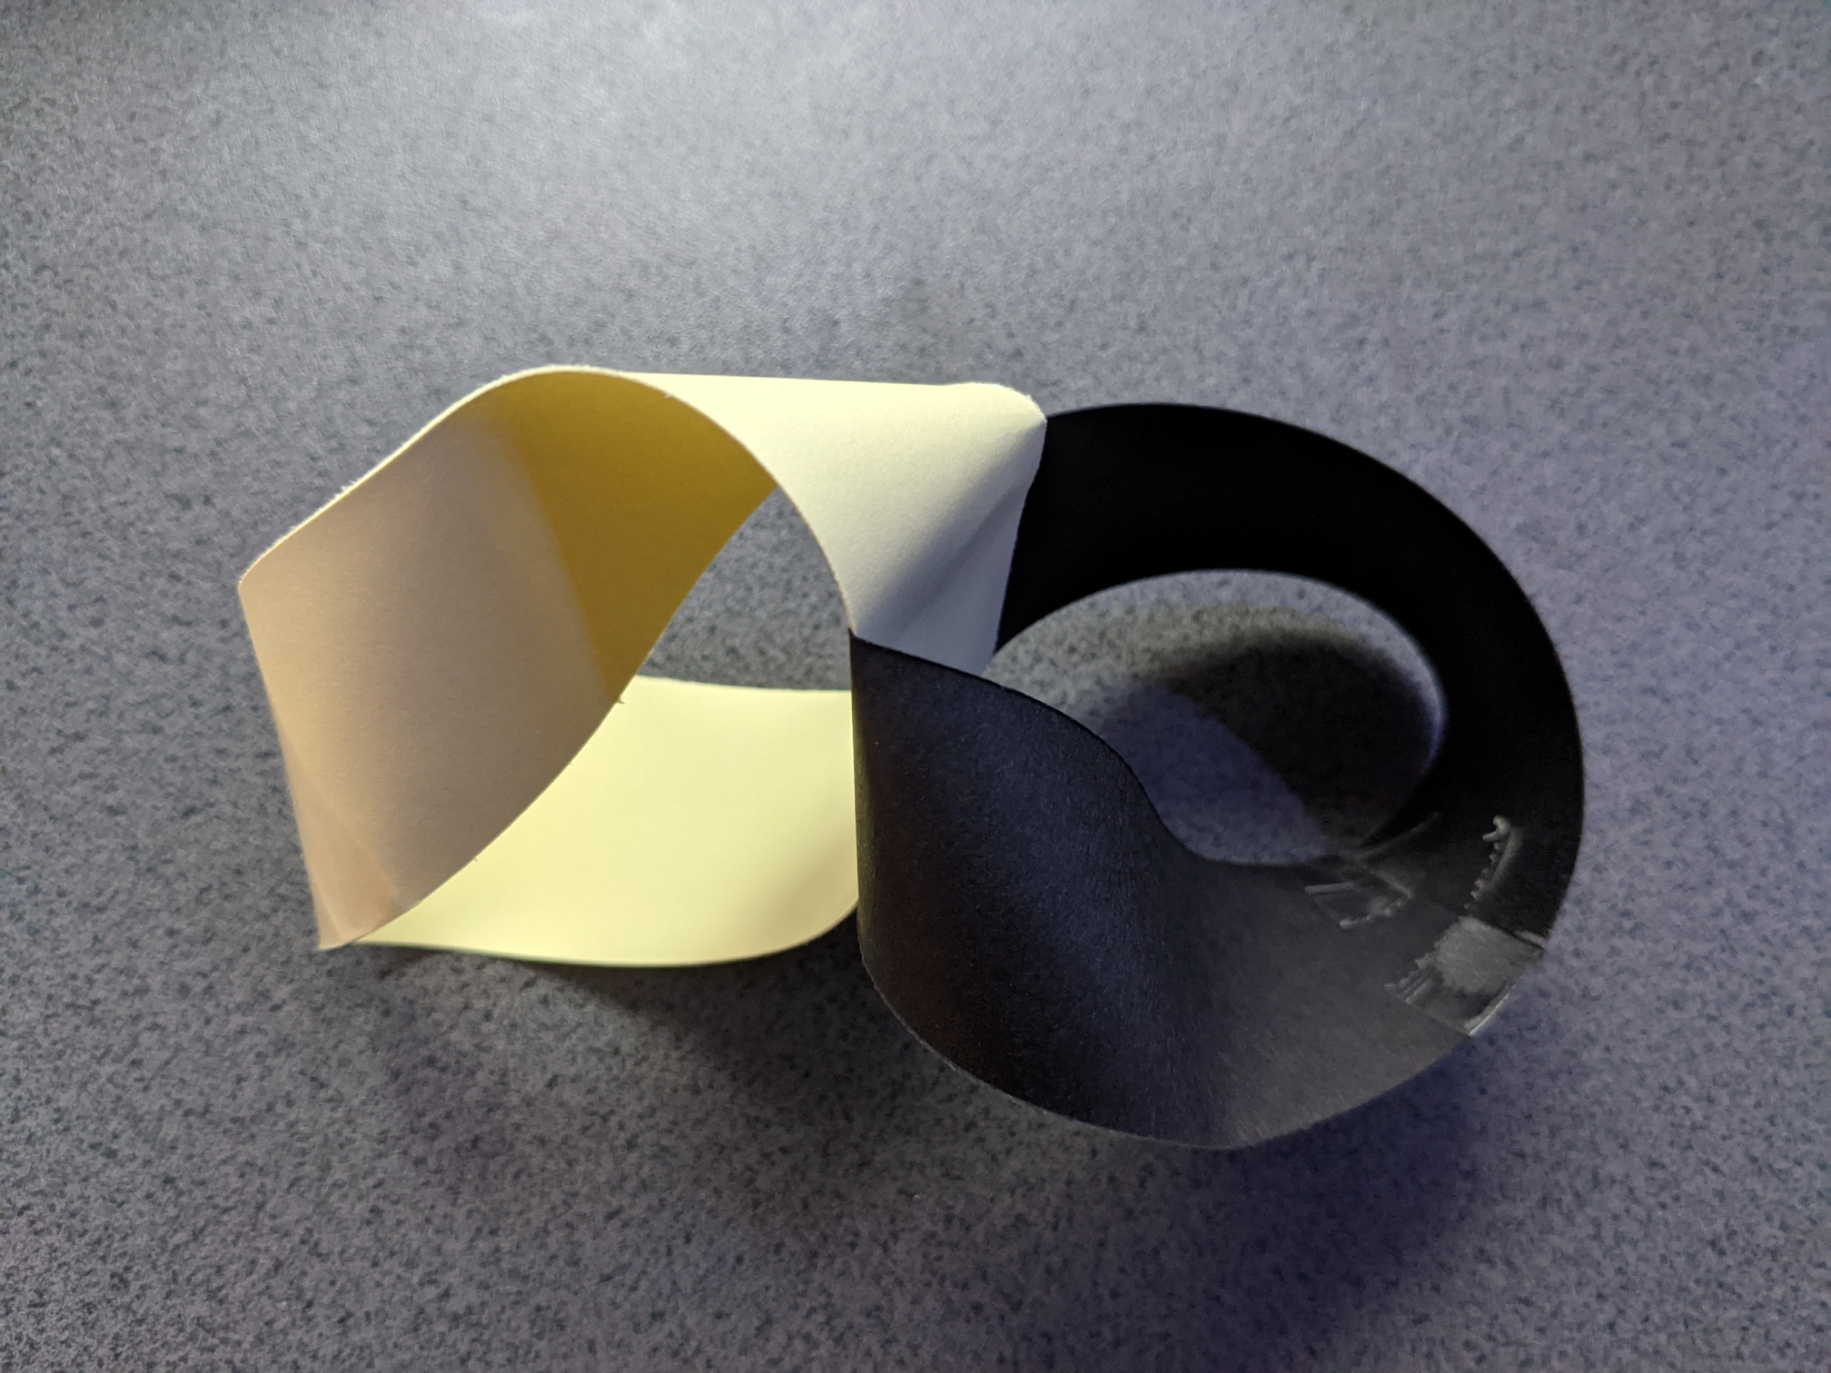 Two Möbius Strips of identical length and opposite twist directions attached at right angles to each other.